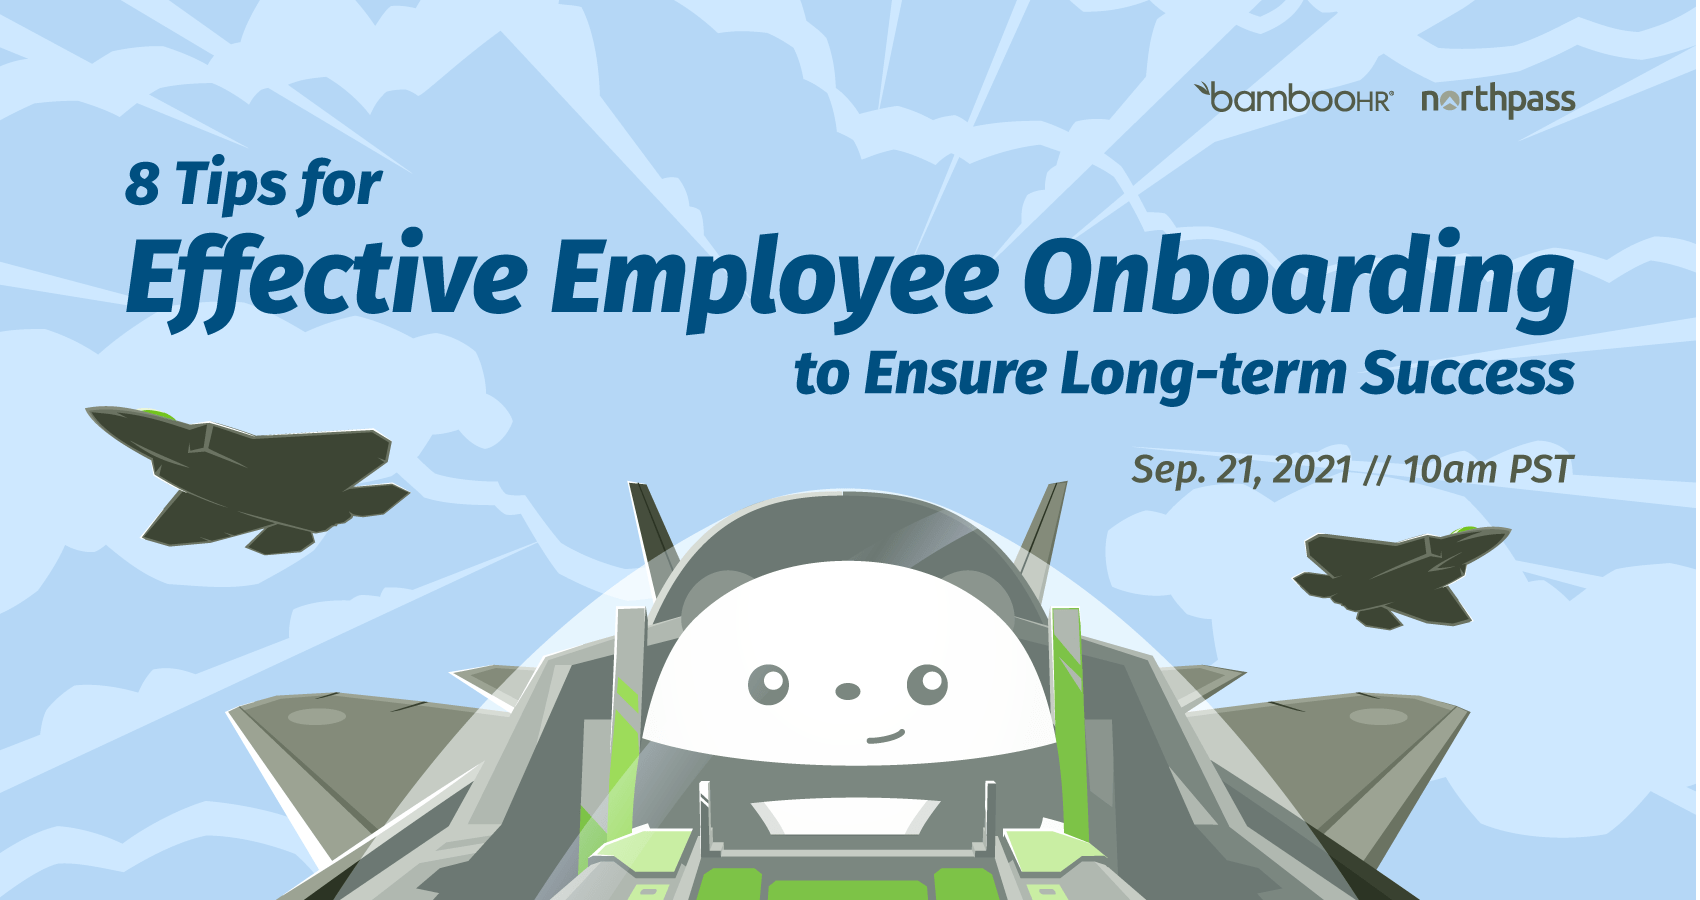 8 Tips for Effective Employee Onboarding to Ensure Long-term Success